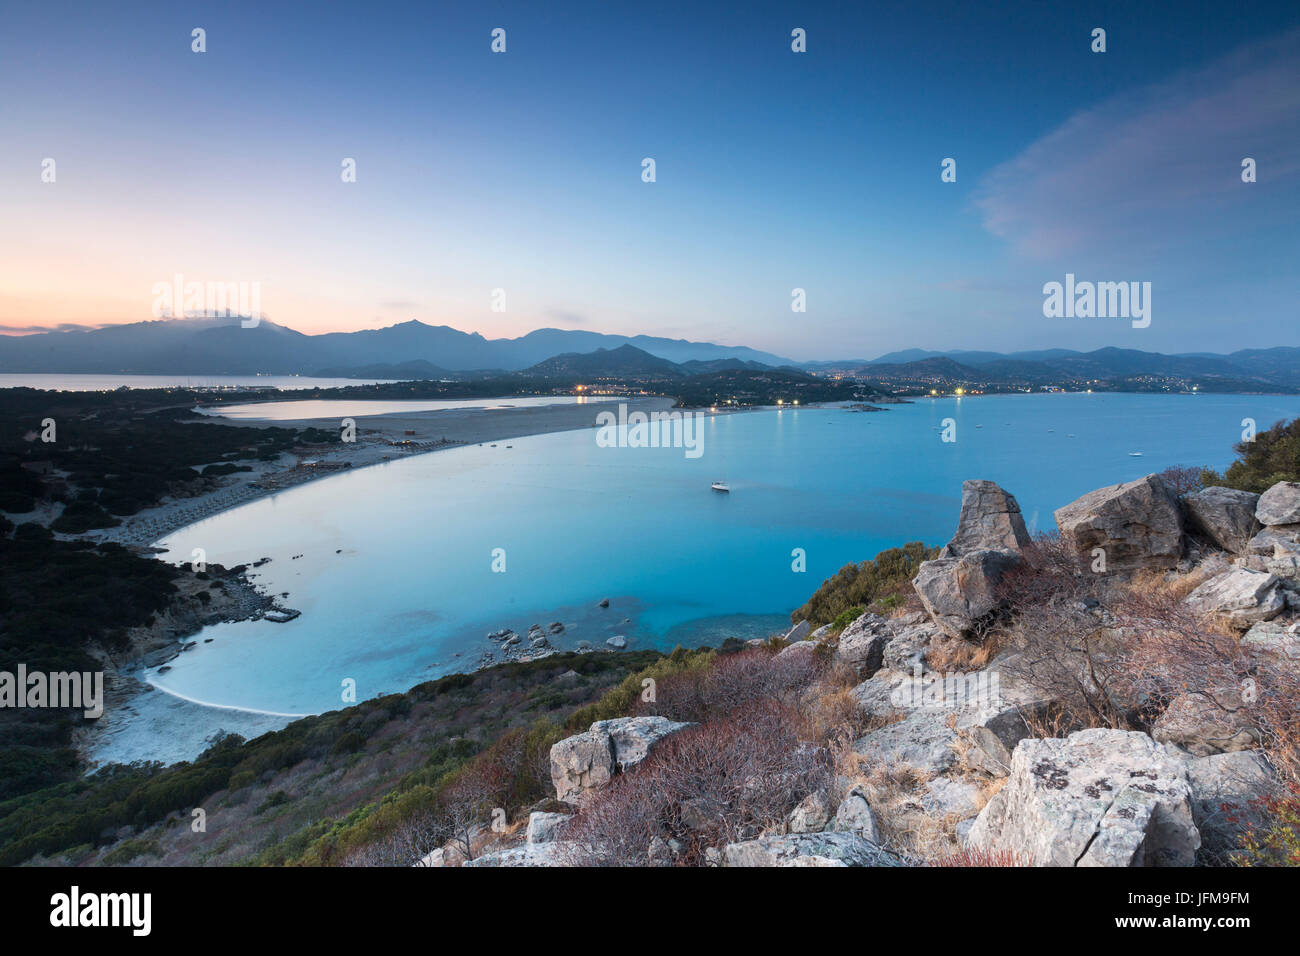 Top view of the bay with sandy beaches and lights of a village at dusk Porto Giunco Villasimius Cagliari Sardinia Italy Europe Stock Photo